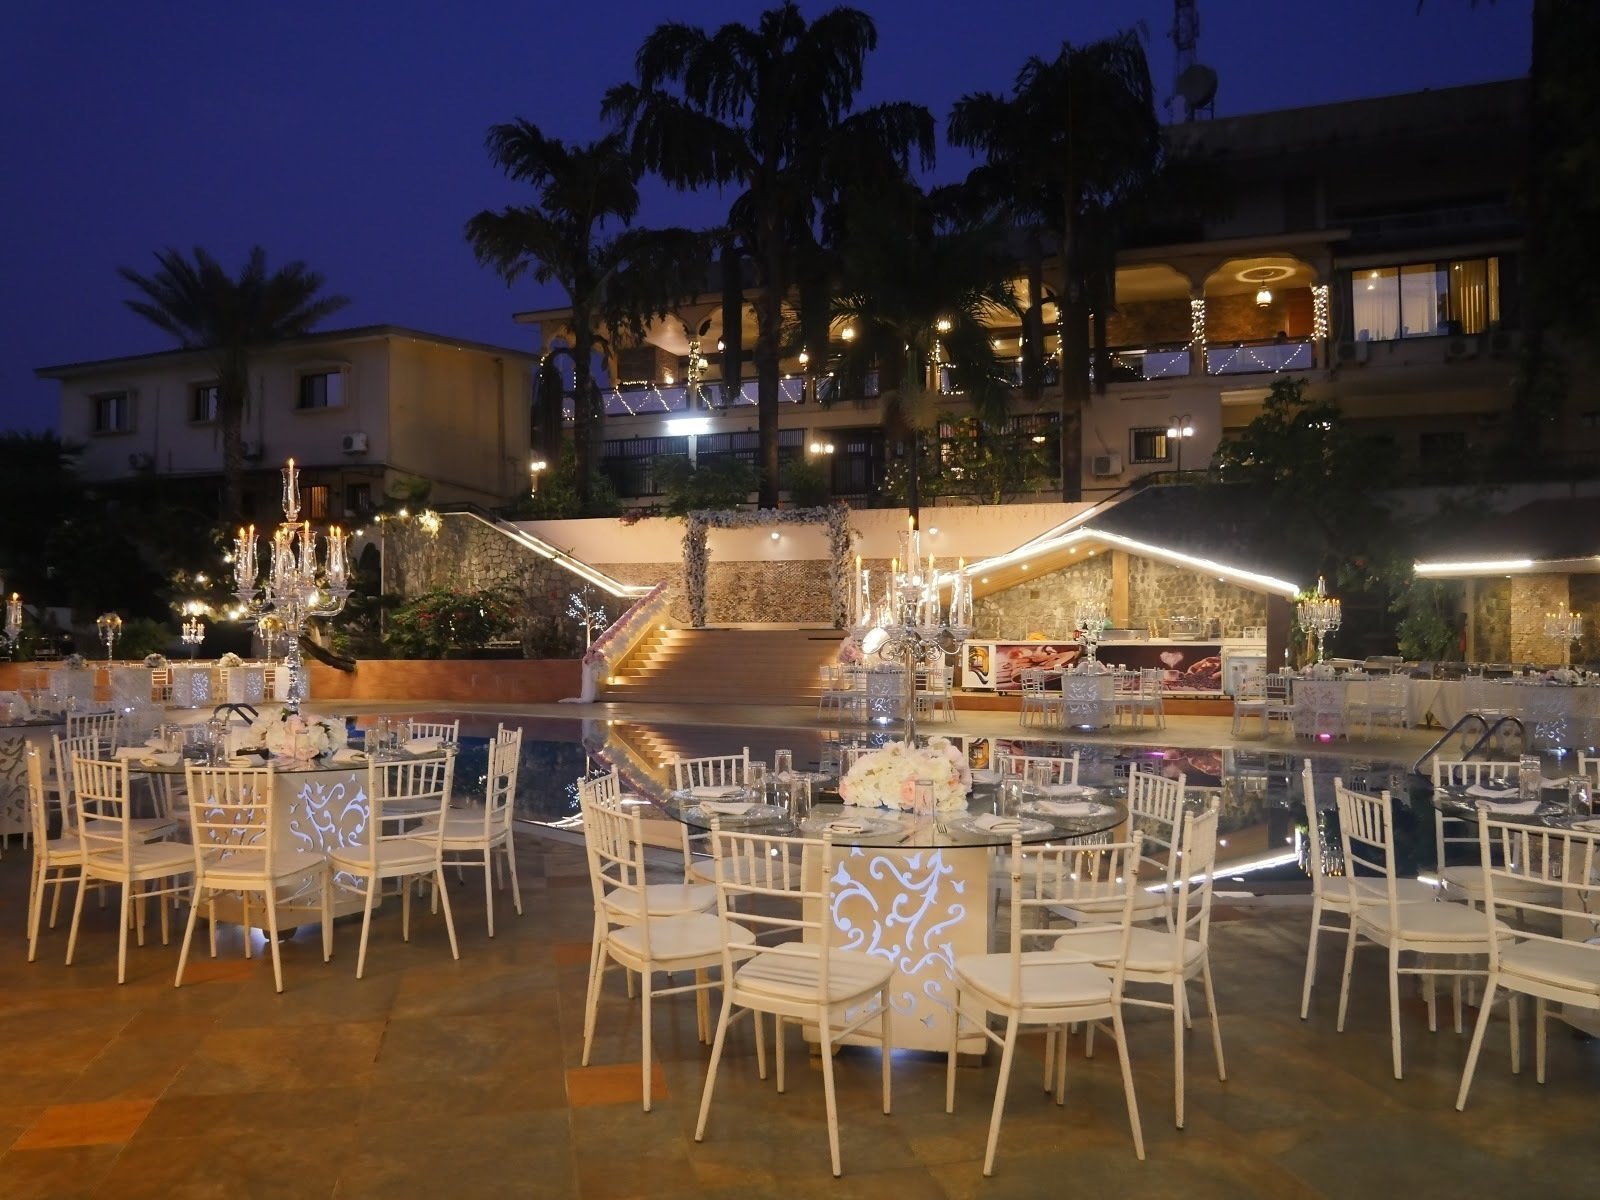 <span class="translation_missing" title="translation missing: en.meta.location_title, location_name: The Country Lodge Hotel, city: Freetown">Location Title</span>